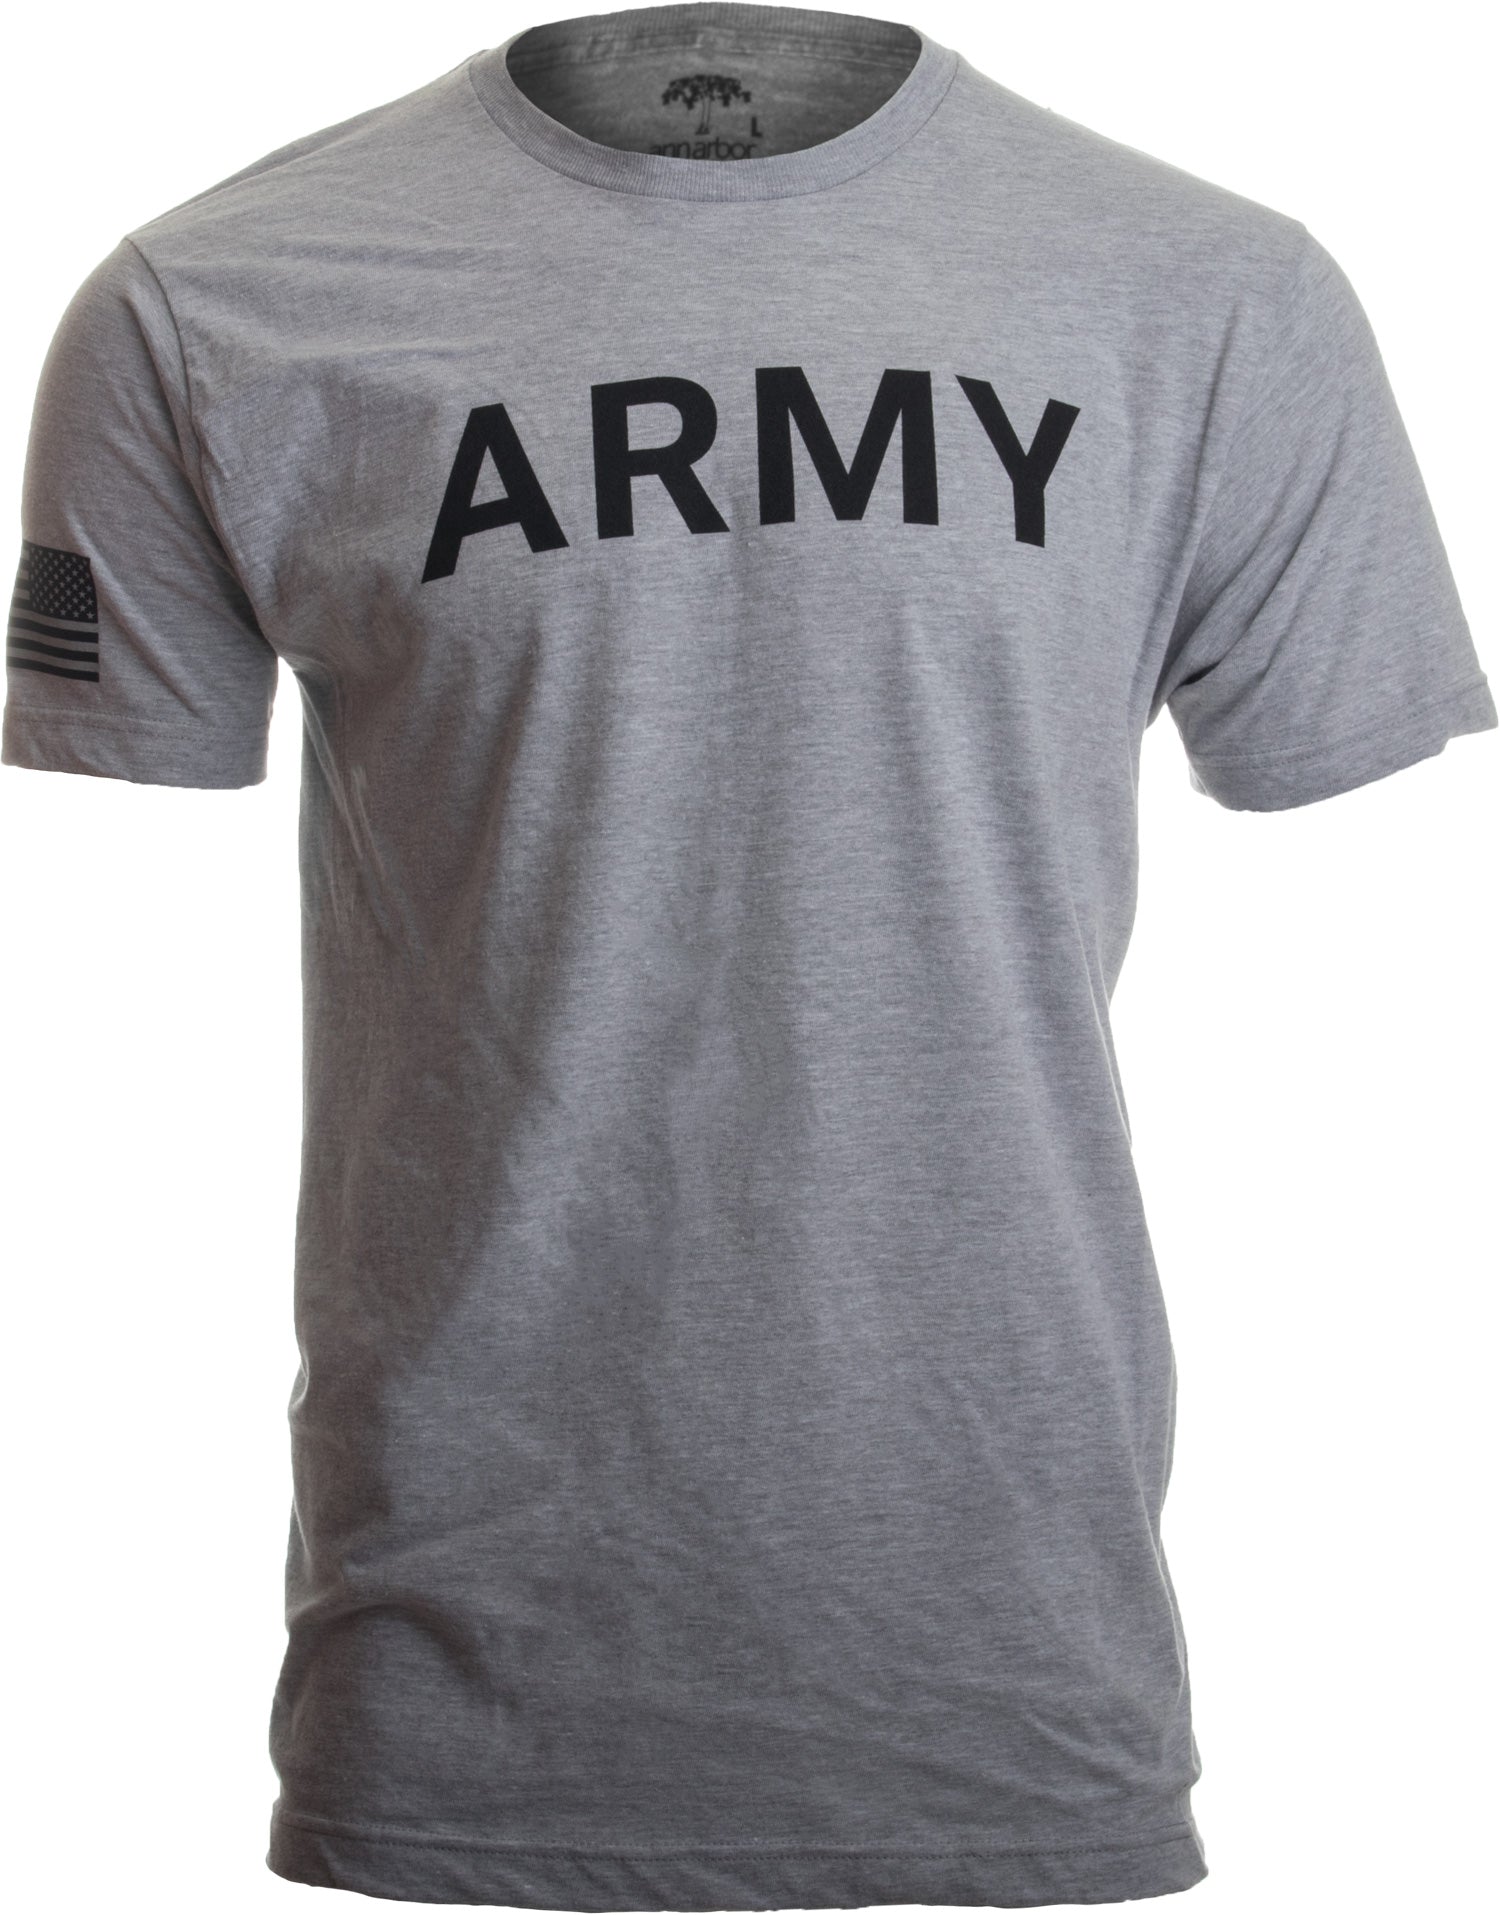 ARMY PT Style Shirt | U.S. Military Physical Traning Infantry Workout T ...